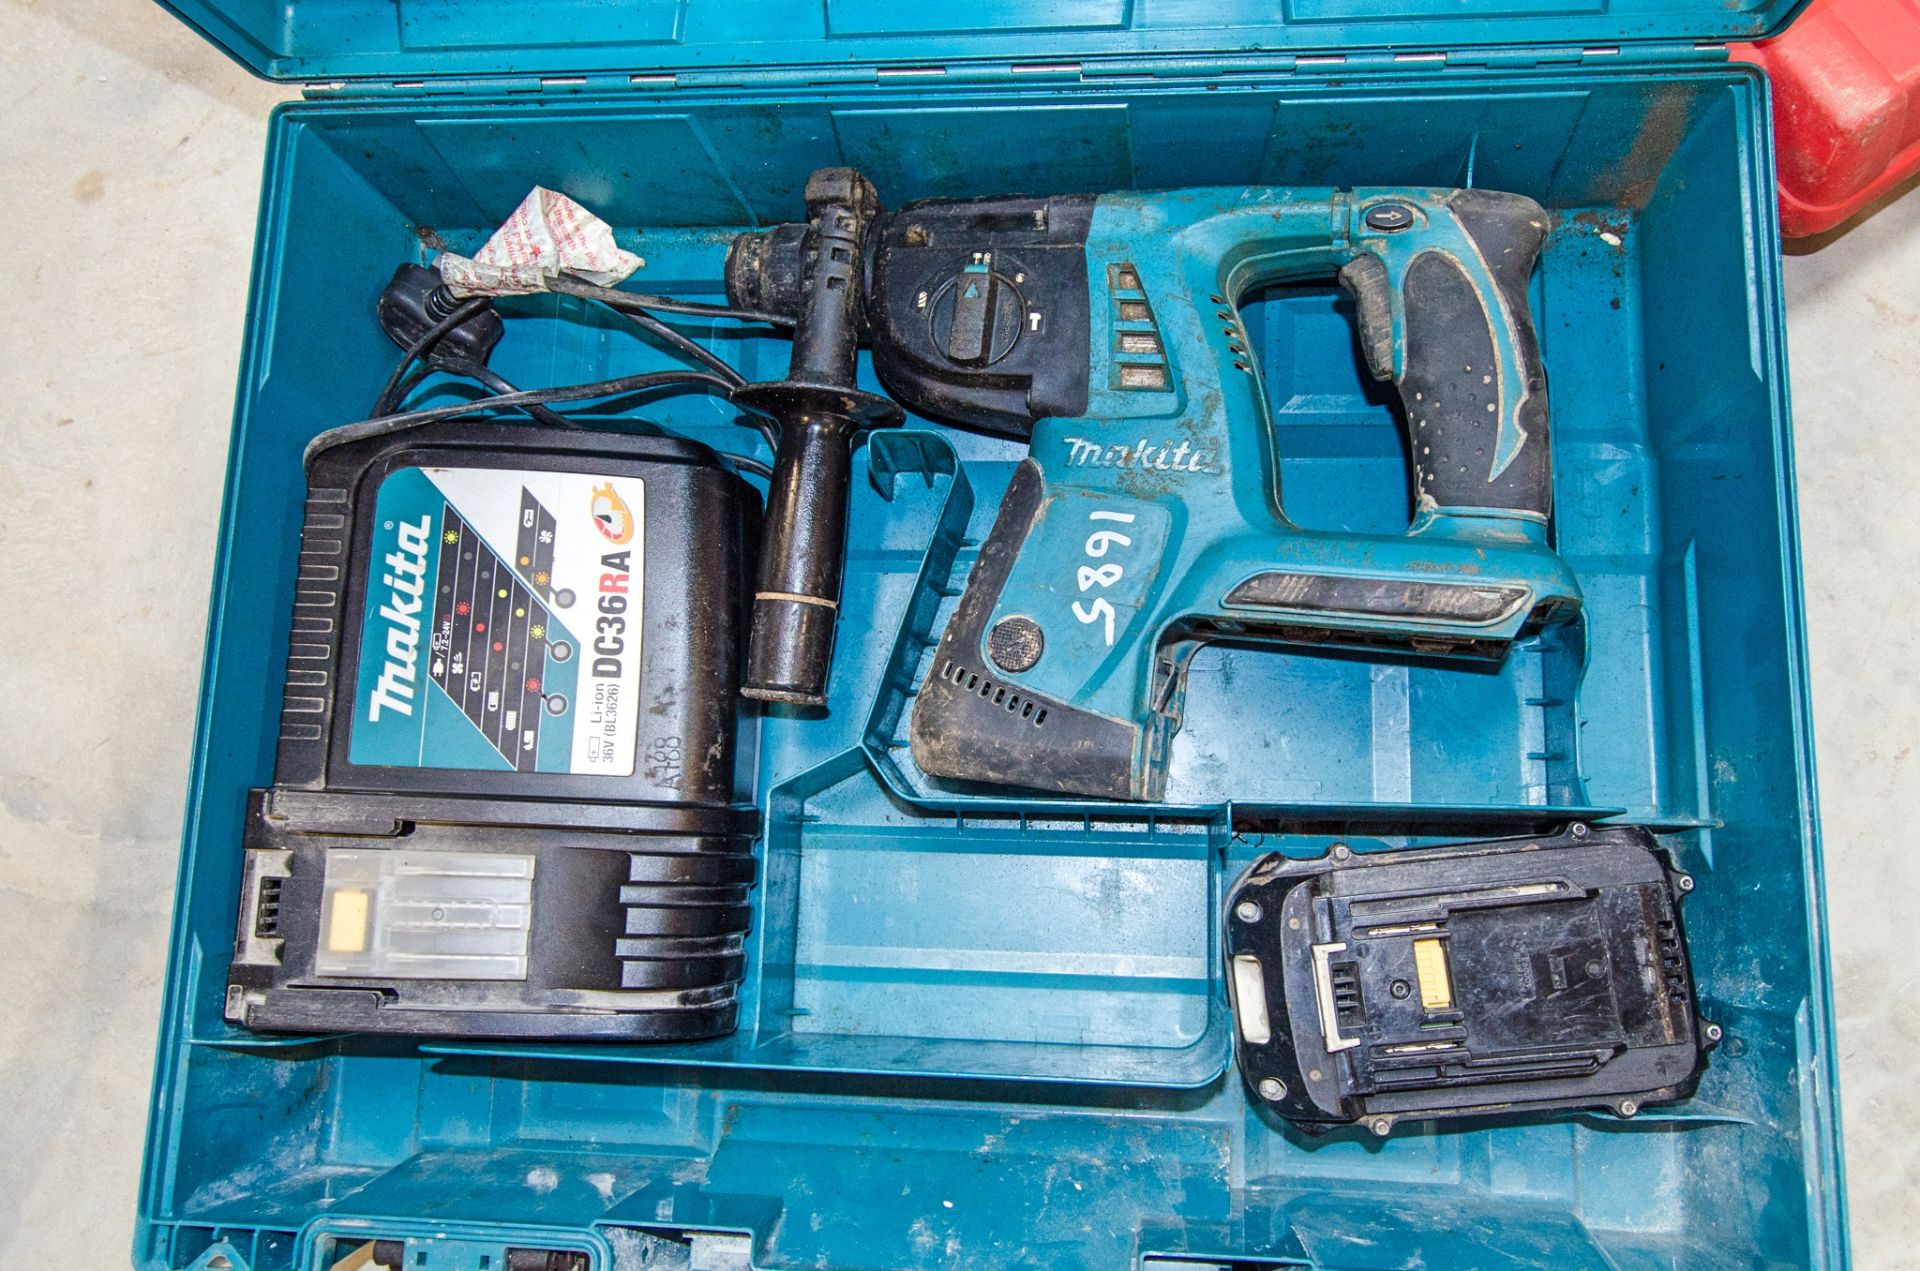 Makita BHR262RDE 36v cordless SDS rotary hammer drill c/w charger, battery and carry case A956652